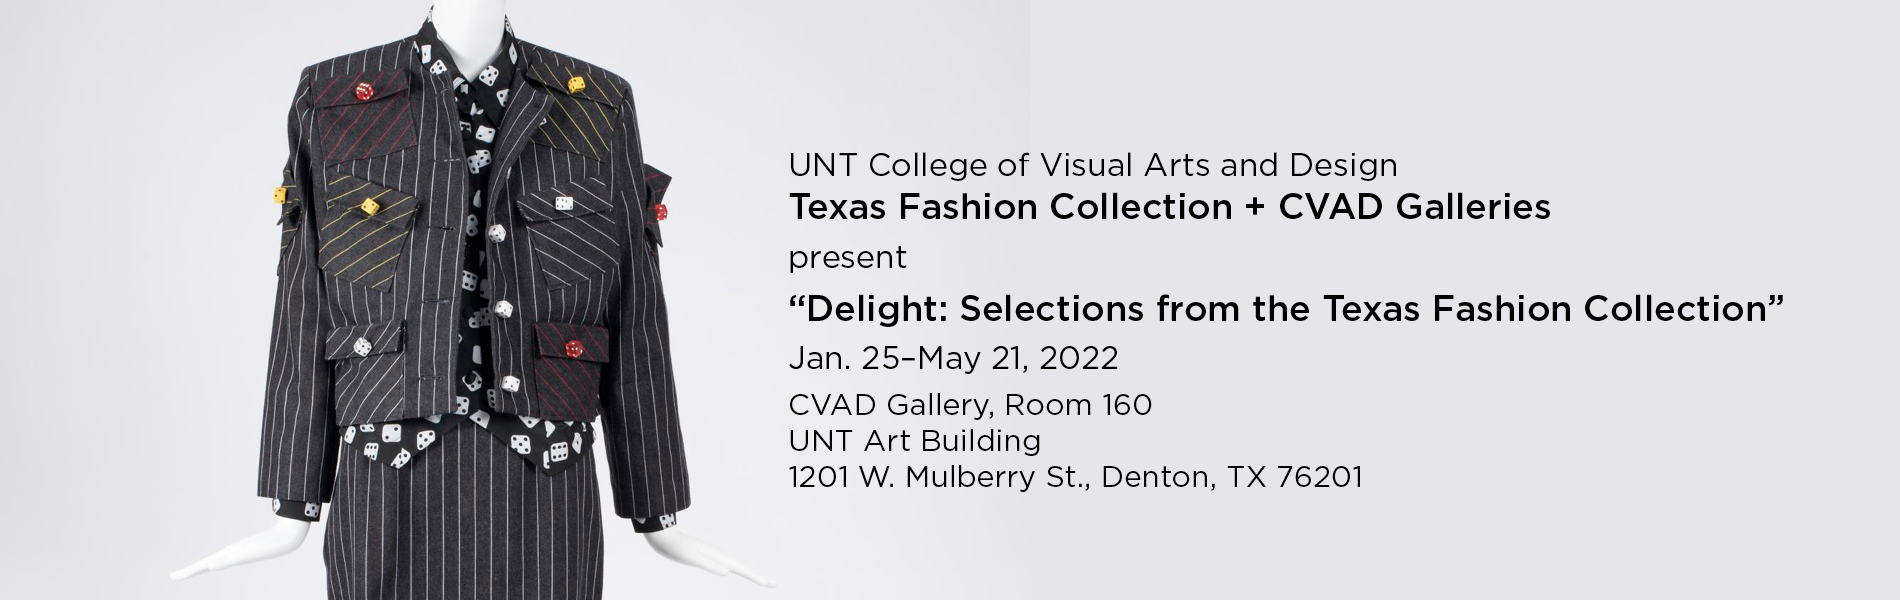 Join us for a fun peek at 35+ rarely displayed artifacts from the Texas Fashion Collection.